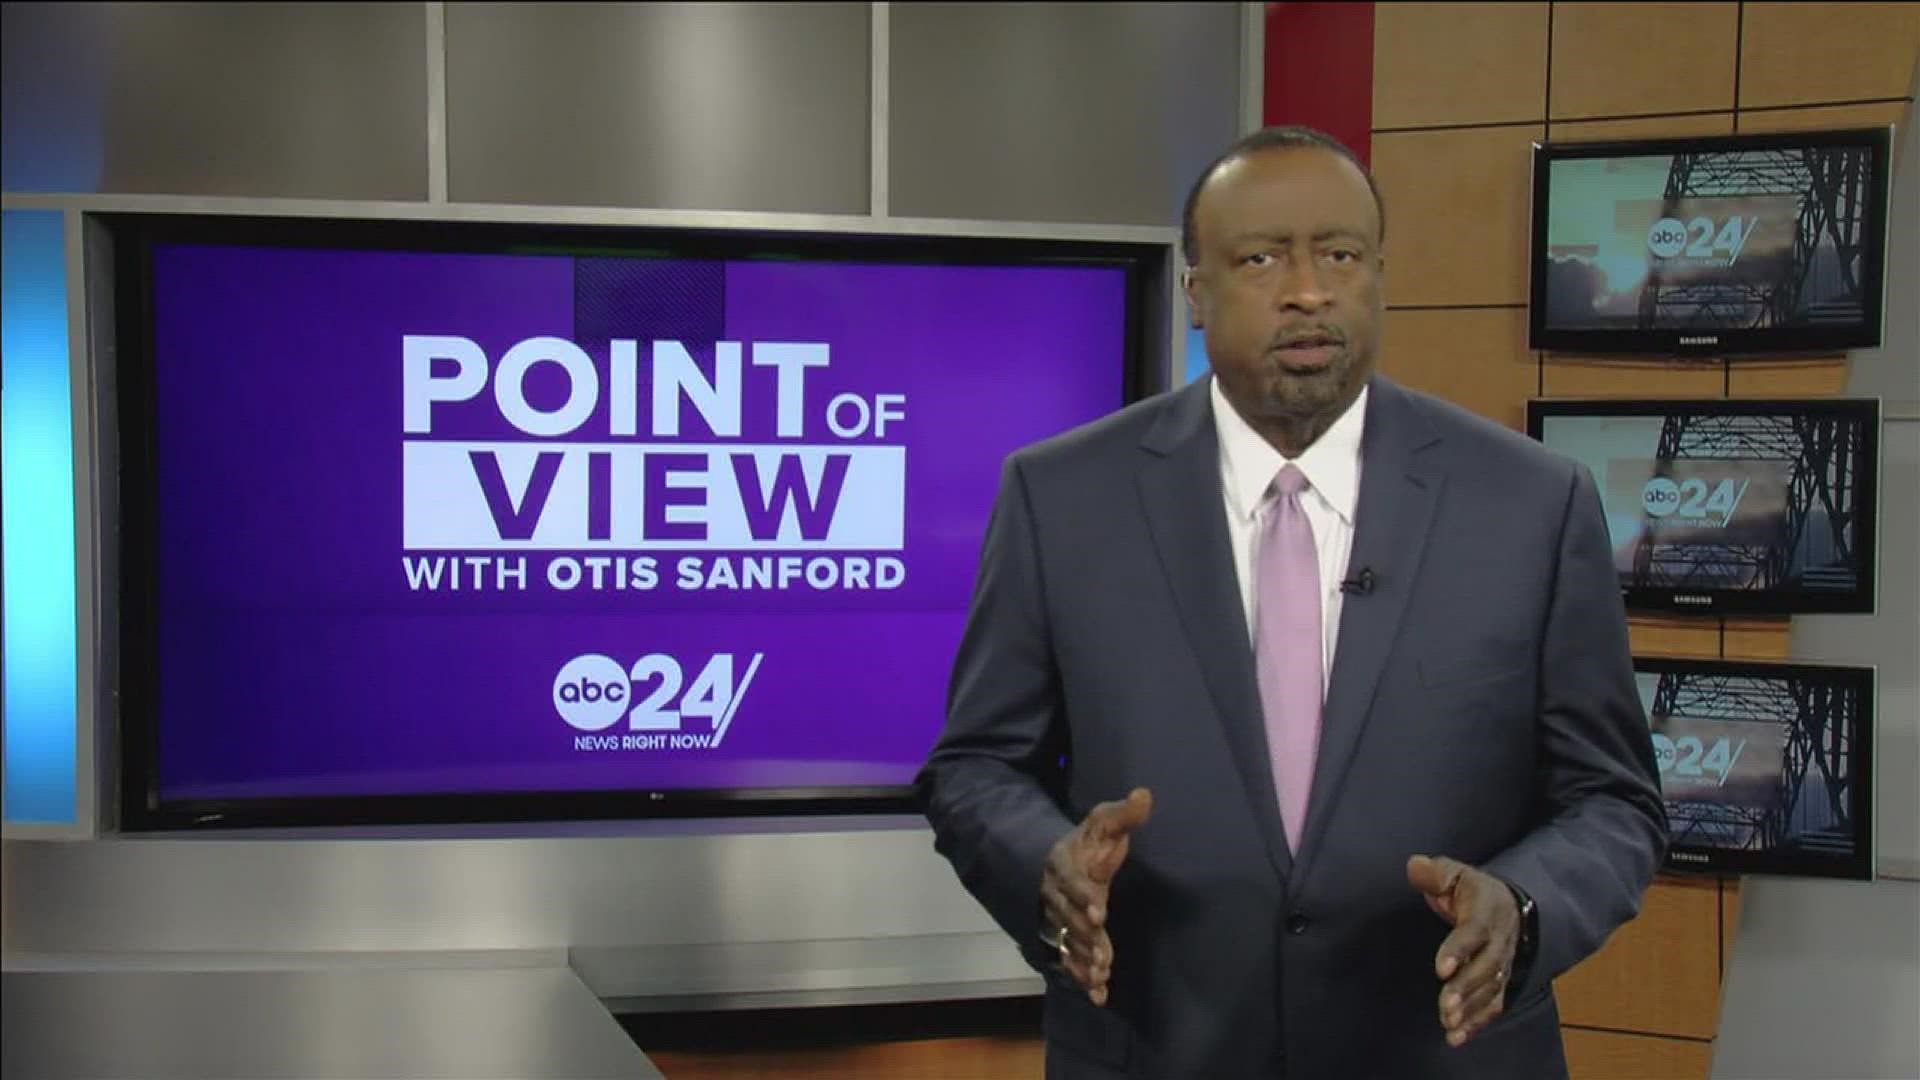 ABC 24 political analyst and commentator Otis Sanford shared his point of view on the mixed actions of the government in regards to COVID-19.